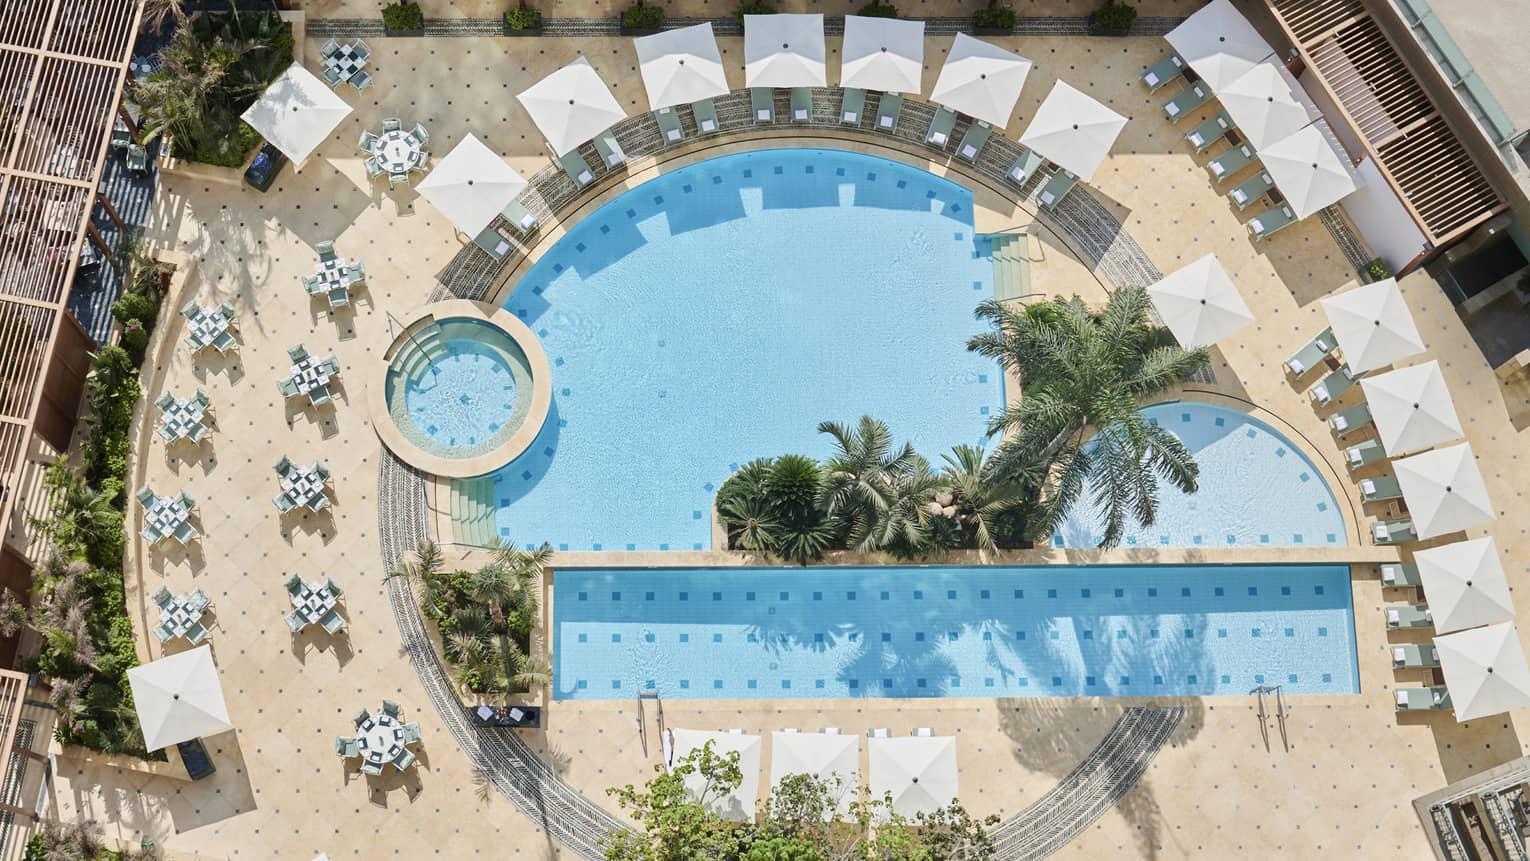 Aerial view of the outdoor pools surrounded by lounge chairs